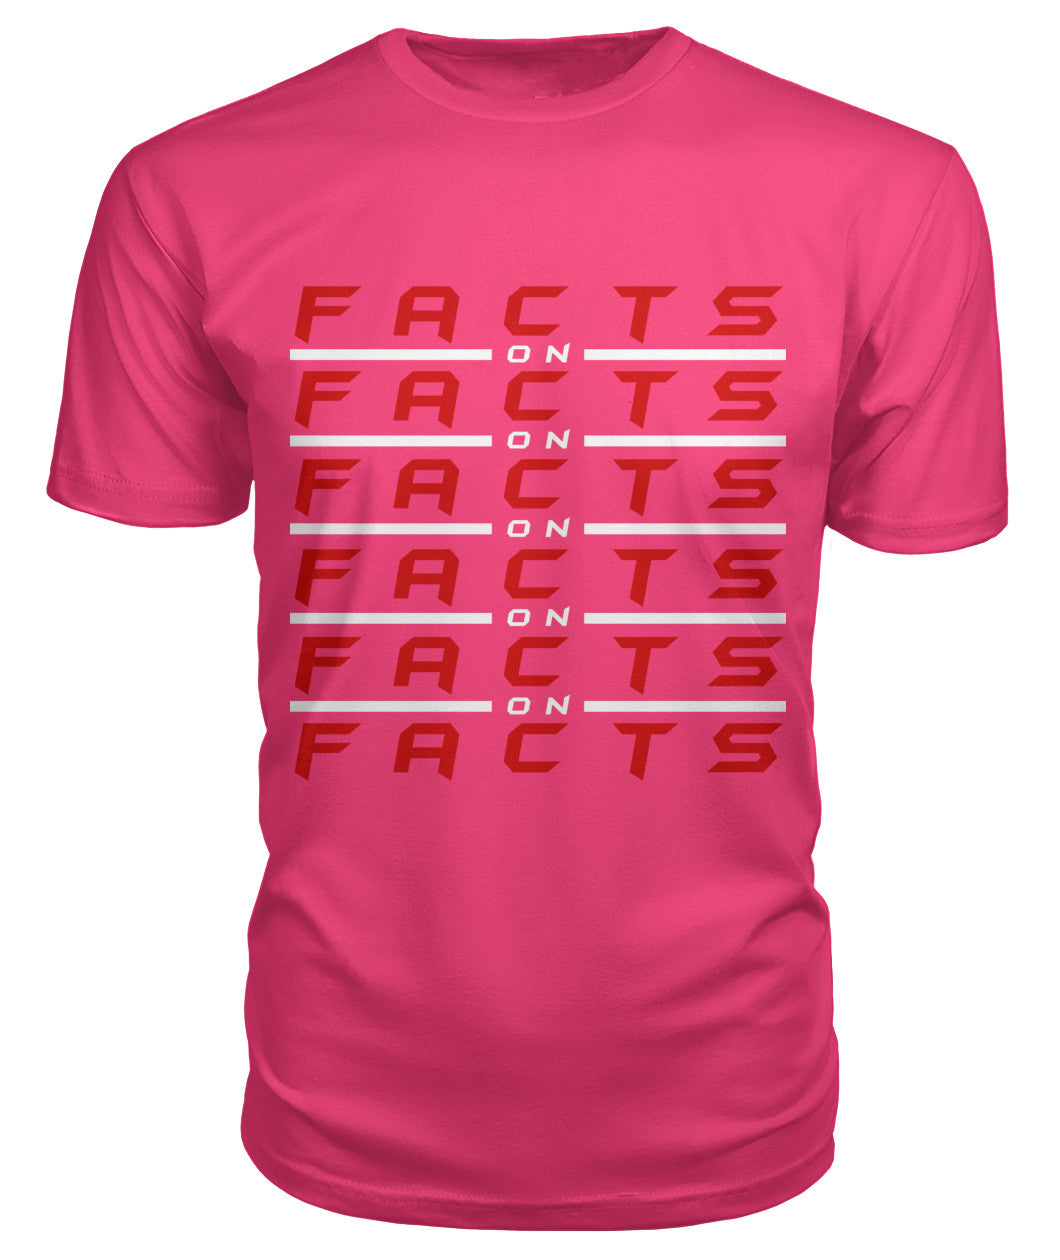 Facts on Facts (T-Shirts)